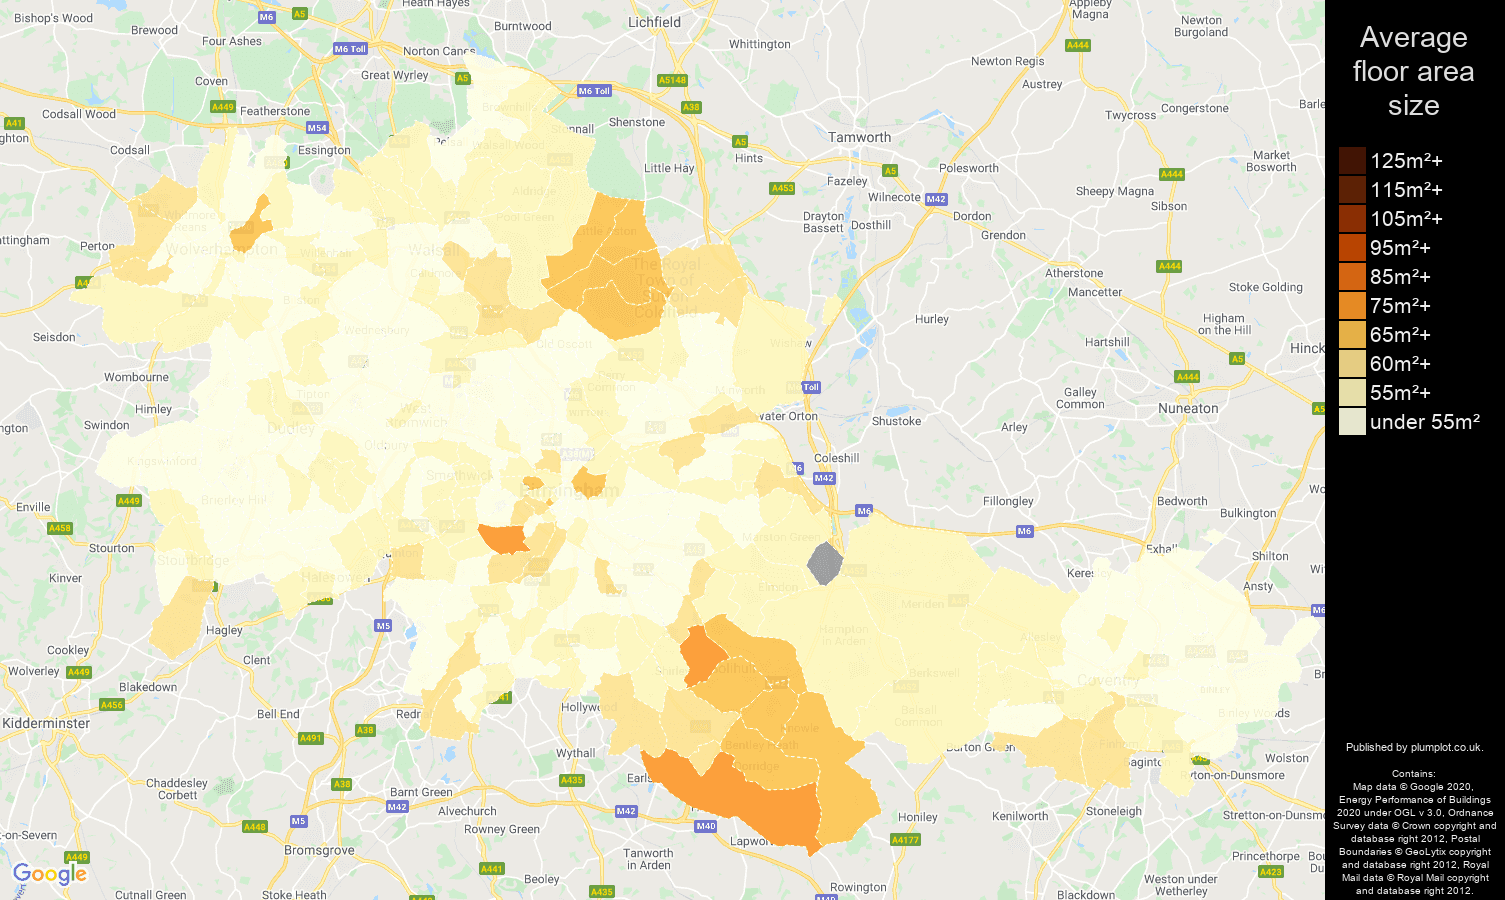 West Midlands county map of average floor area size of flats